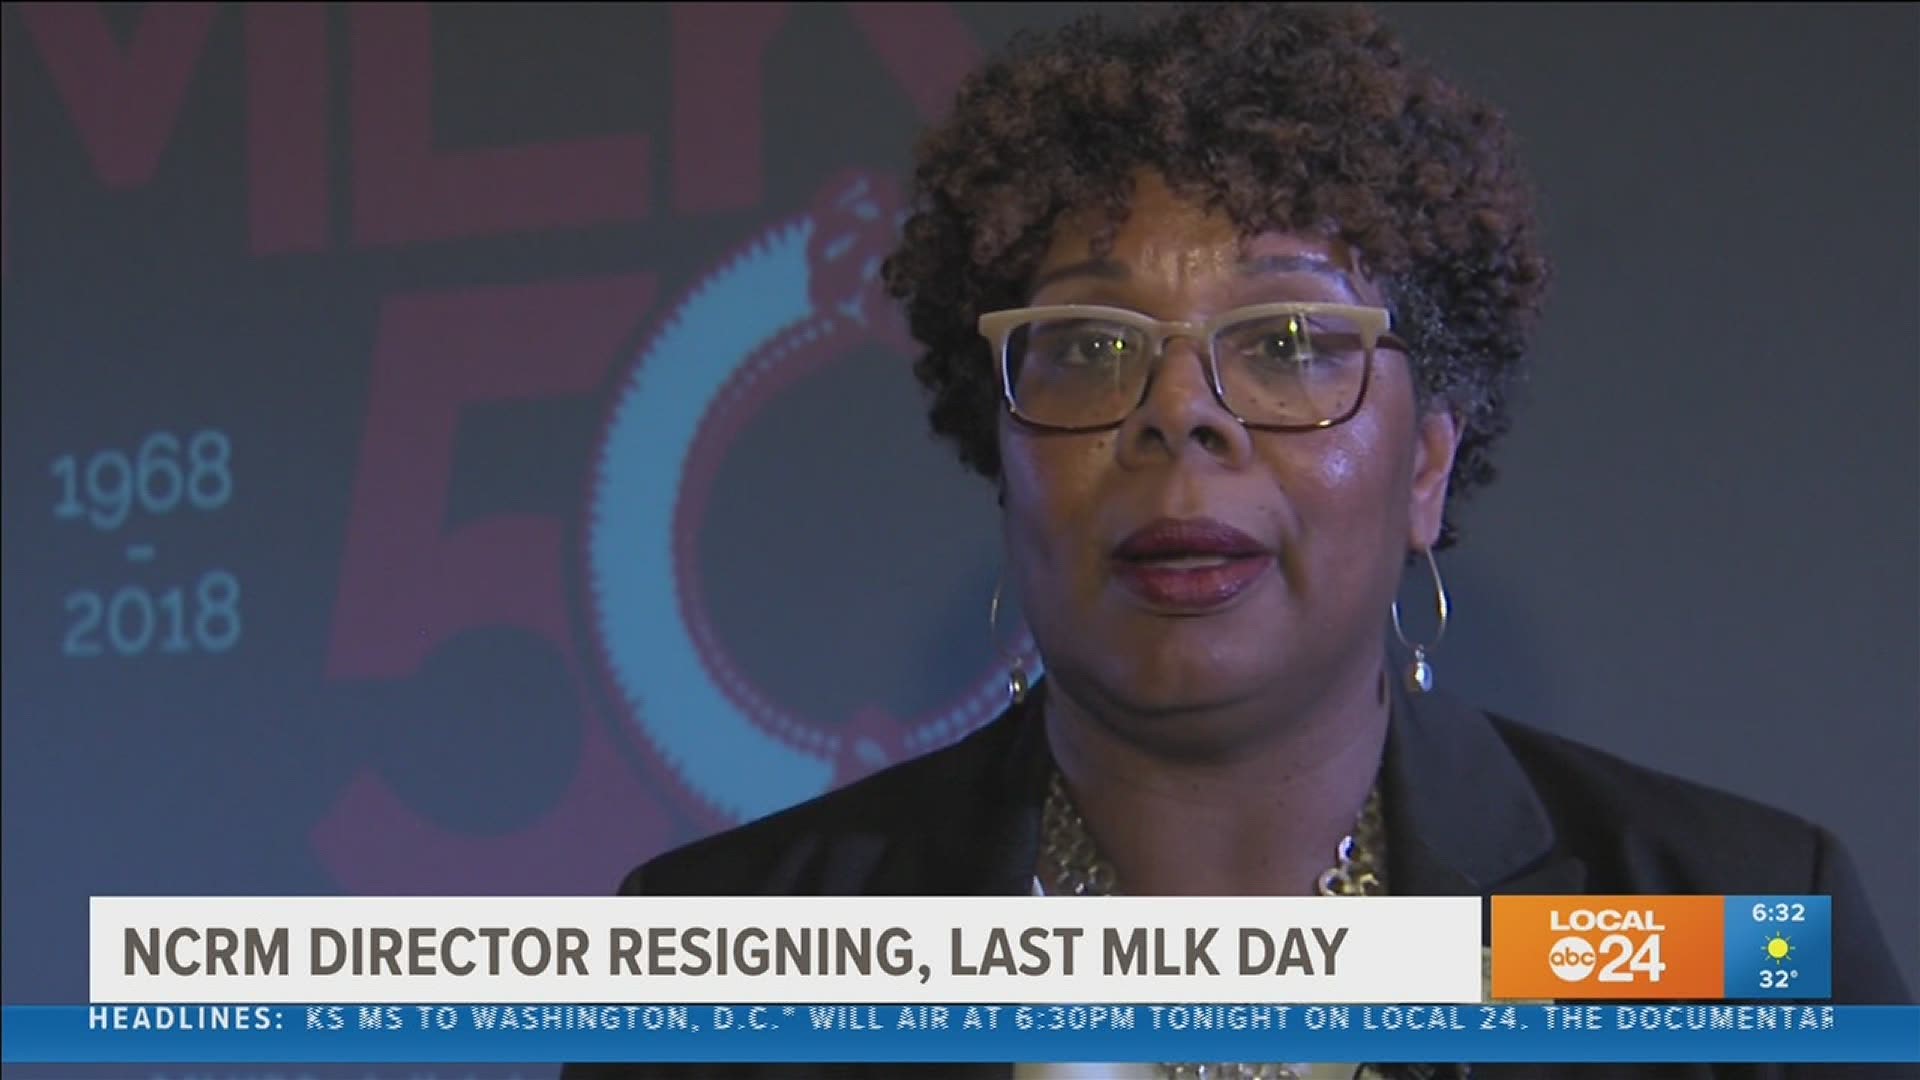 The President of the National Civil Rights Museum announced last month she would be resigning from her role after six years.